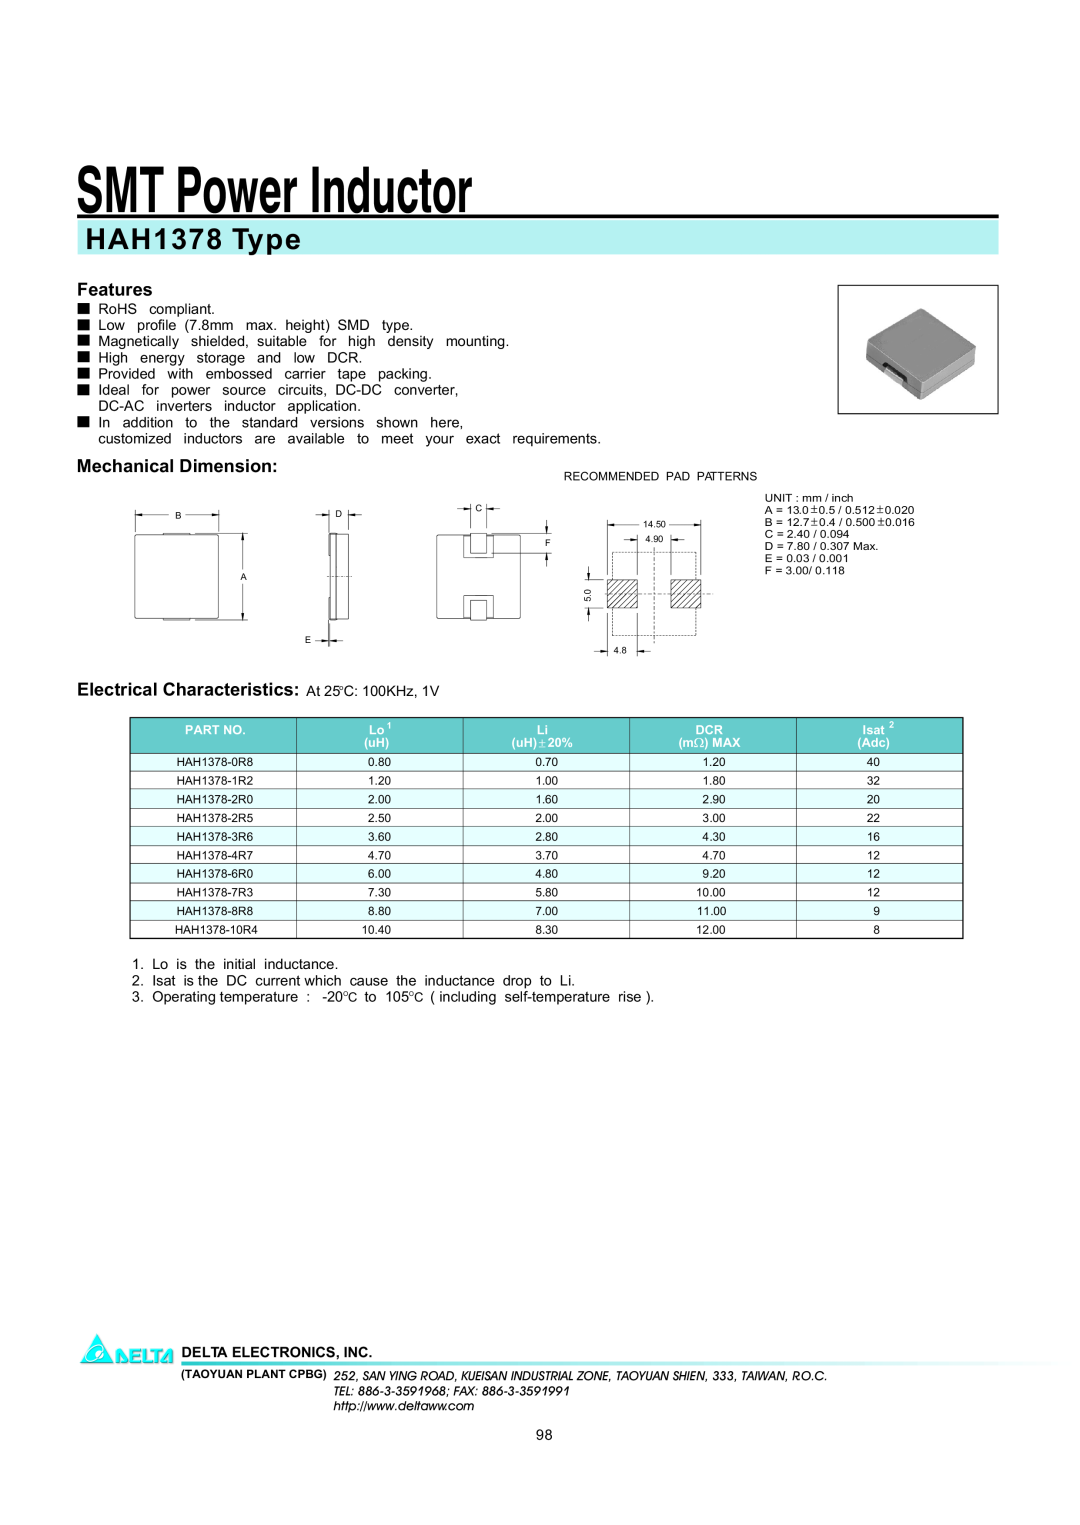 Delta Electronics manual SMT Power Inductor, HAH1378 Type, Features, Mechanical Dimension, Delta Electronics, Inc 